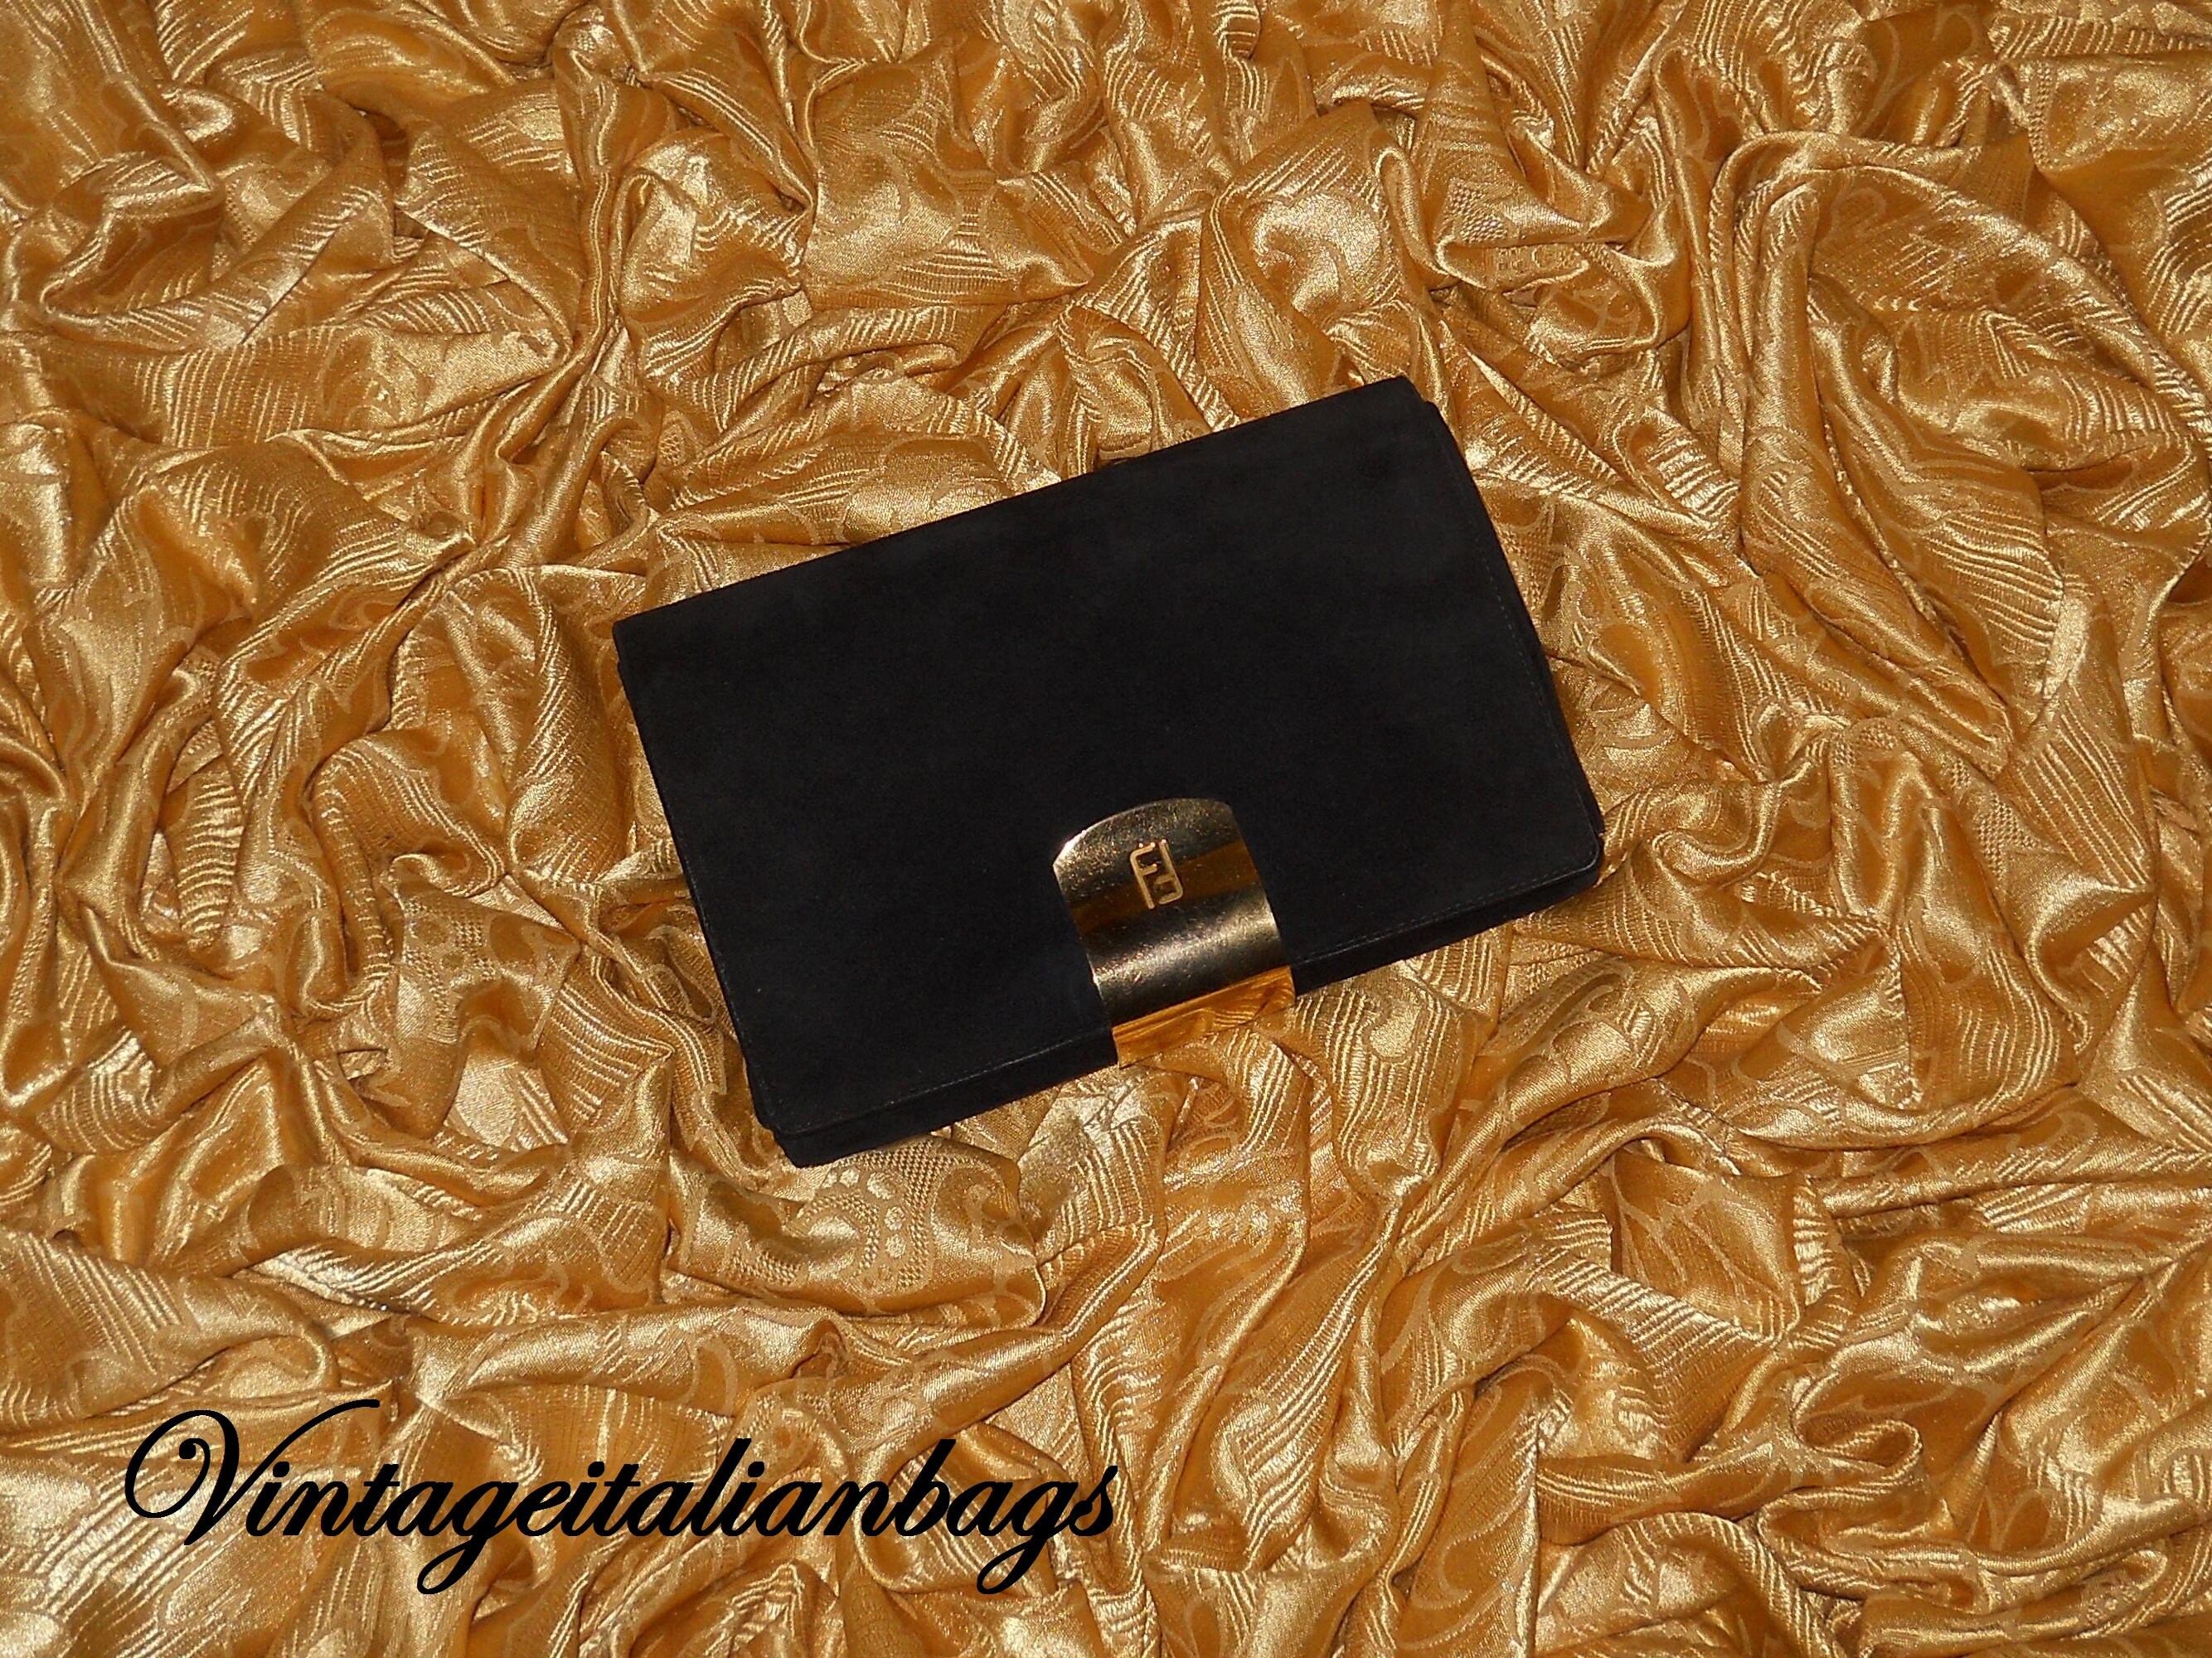 1980s Fendi Red Suede Metal Closure Pouch Bag – style - CHNGR